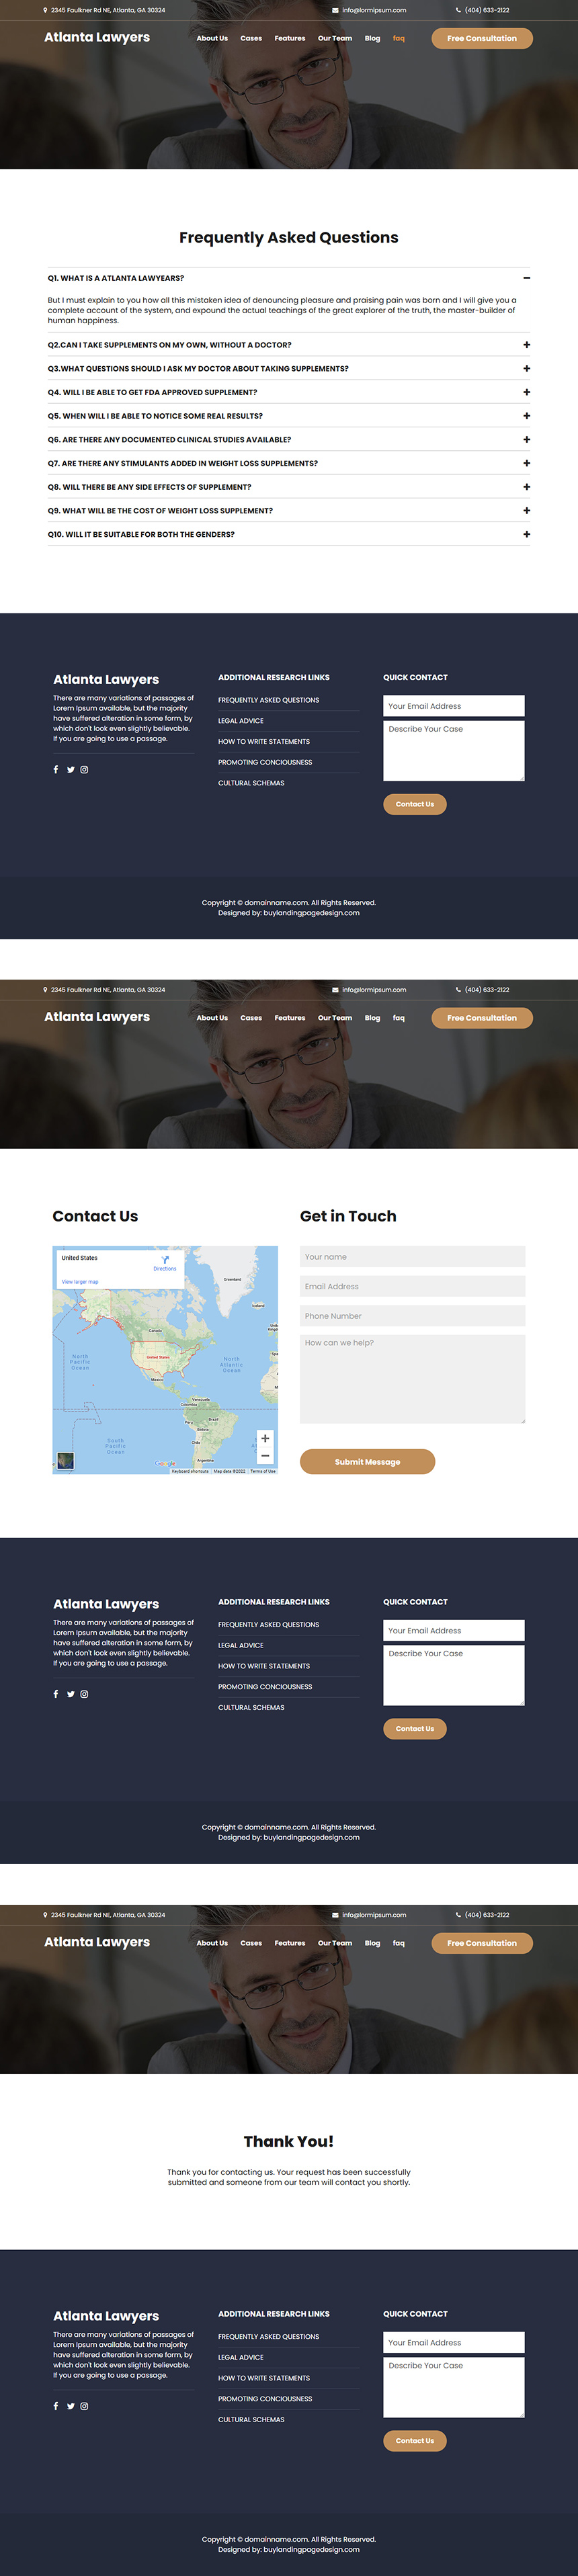 professional law firm free consultation responsive website design